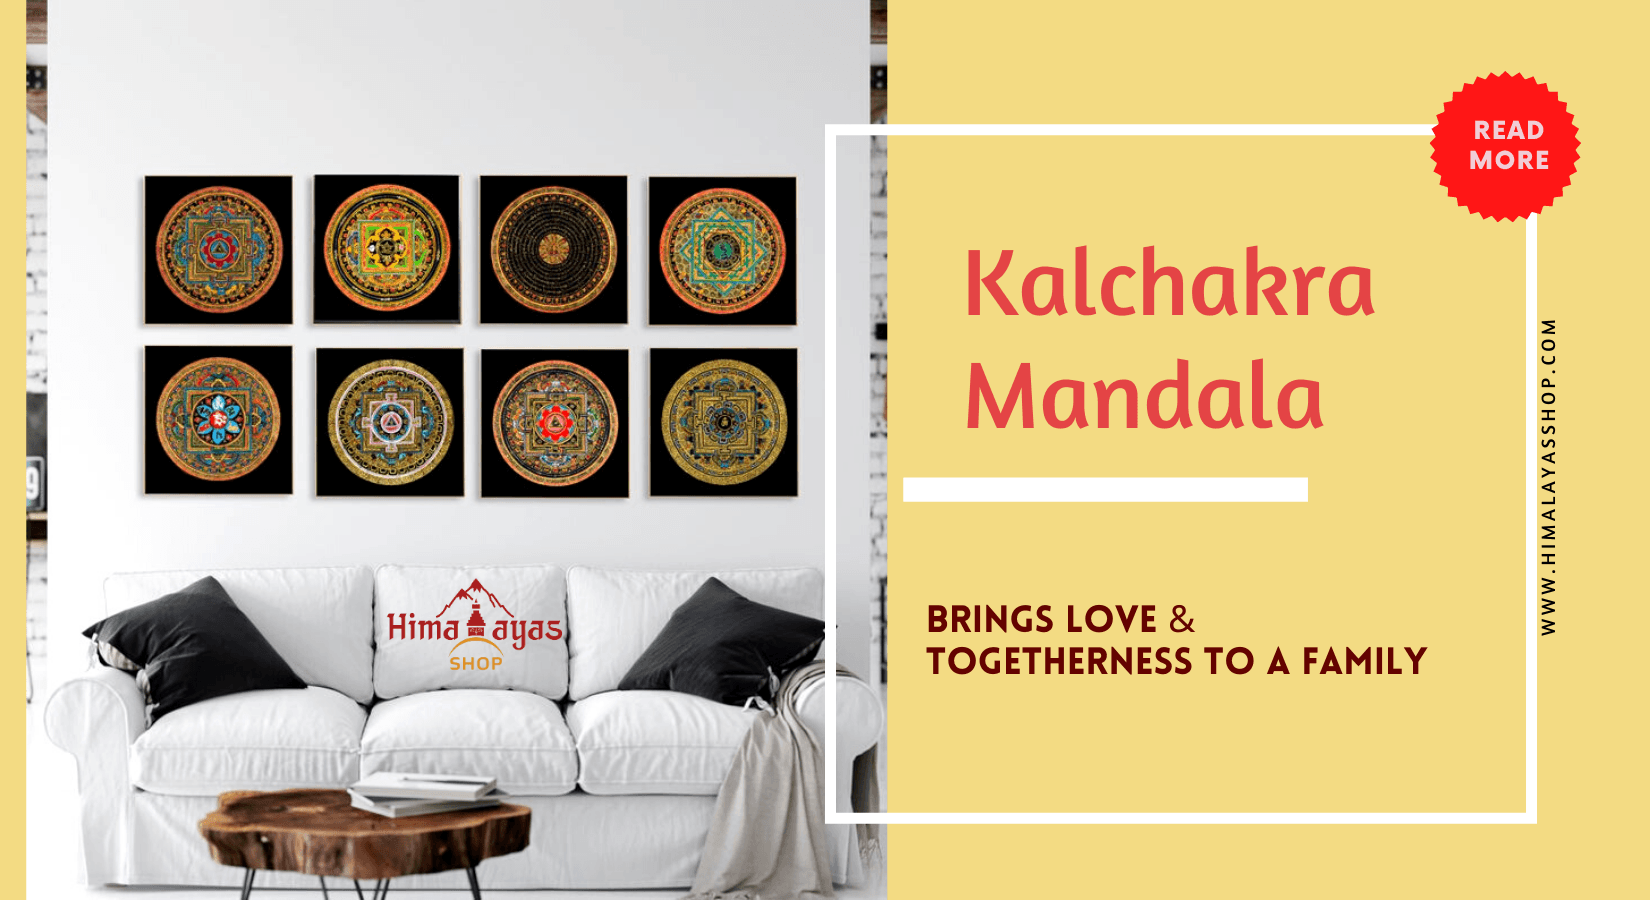 Mandala Thangka Decoration for Home and its Benefits to a Family